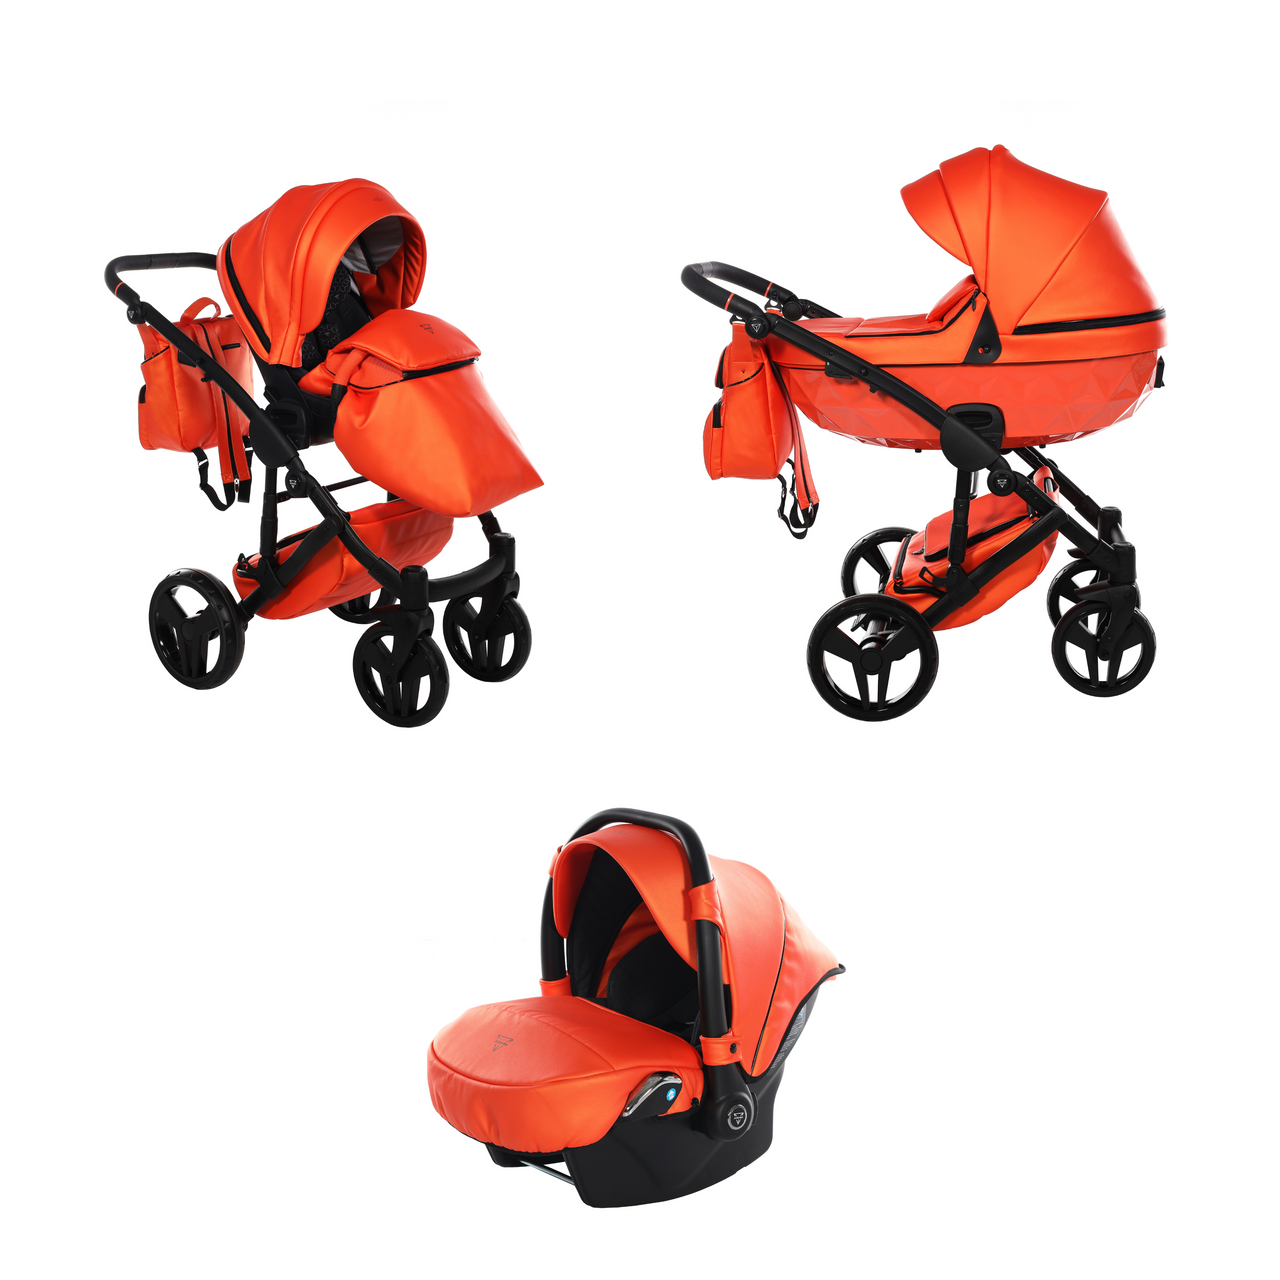 Junama S-Class 3 In 1 Travel System - Orange - For Your Little One